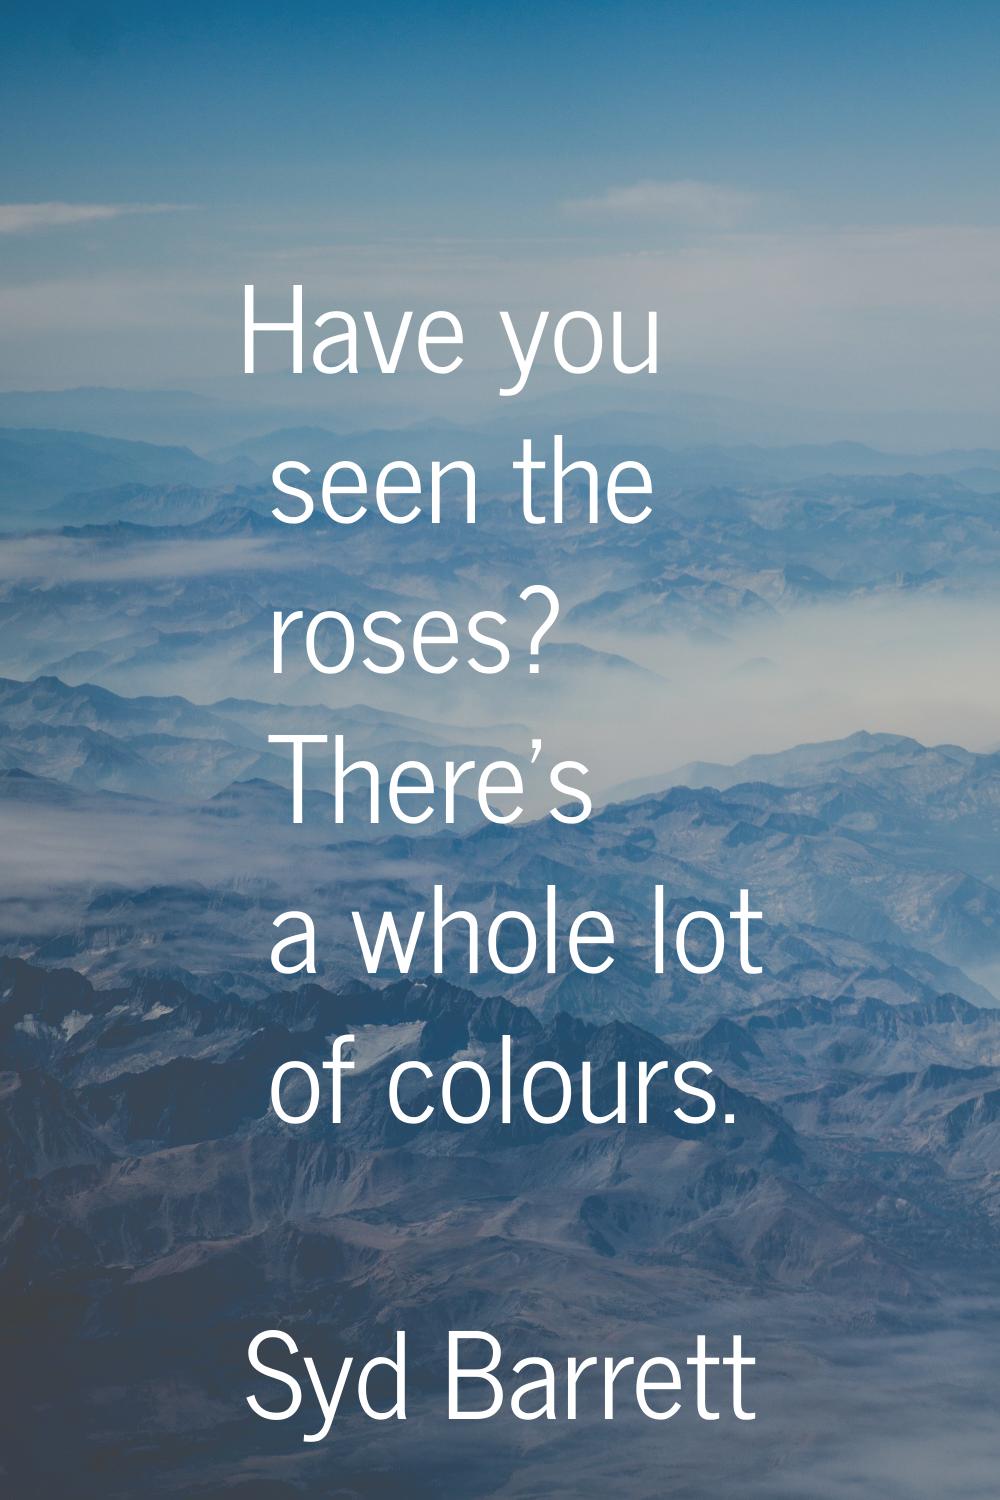 Have you seen the roses? There's a whole lot of colours.